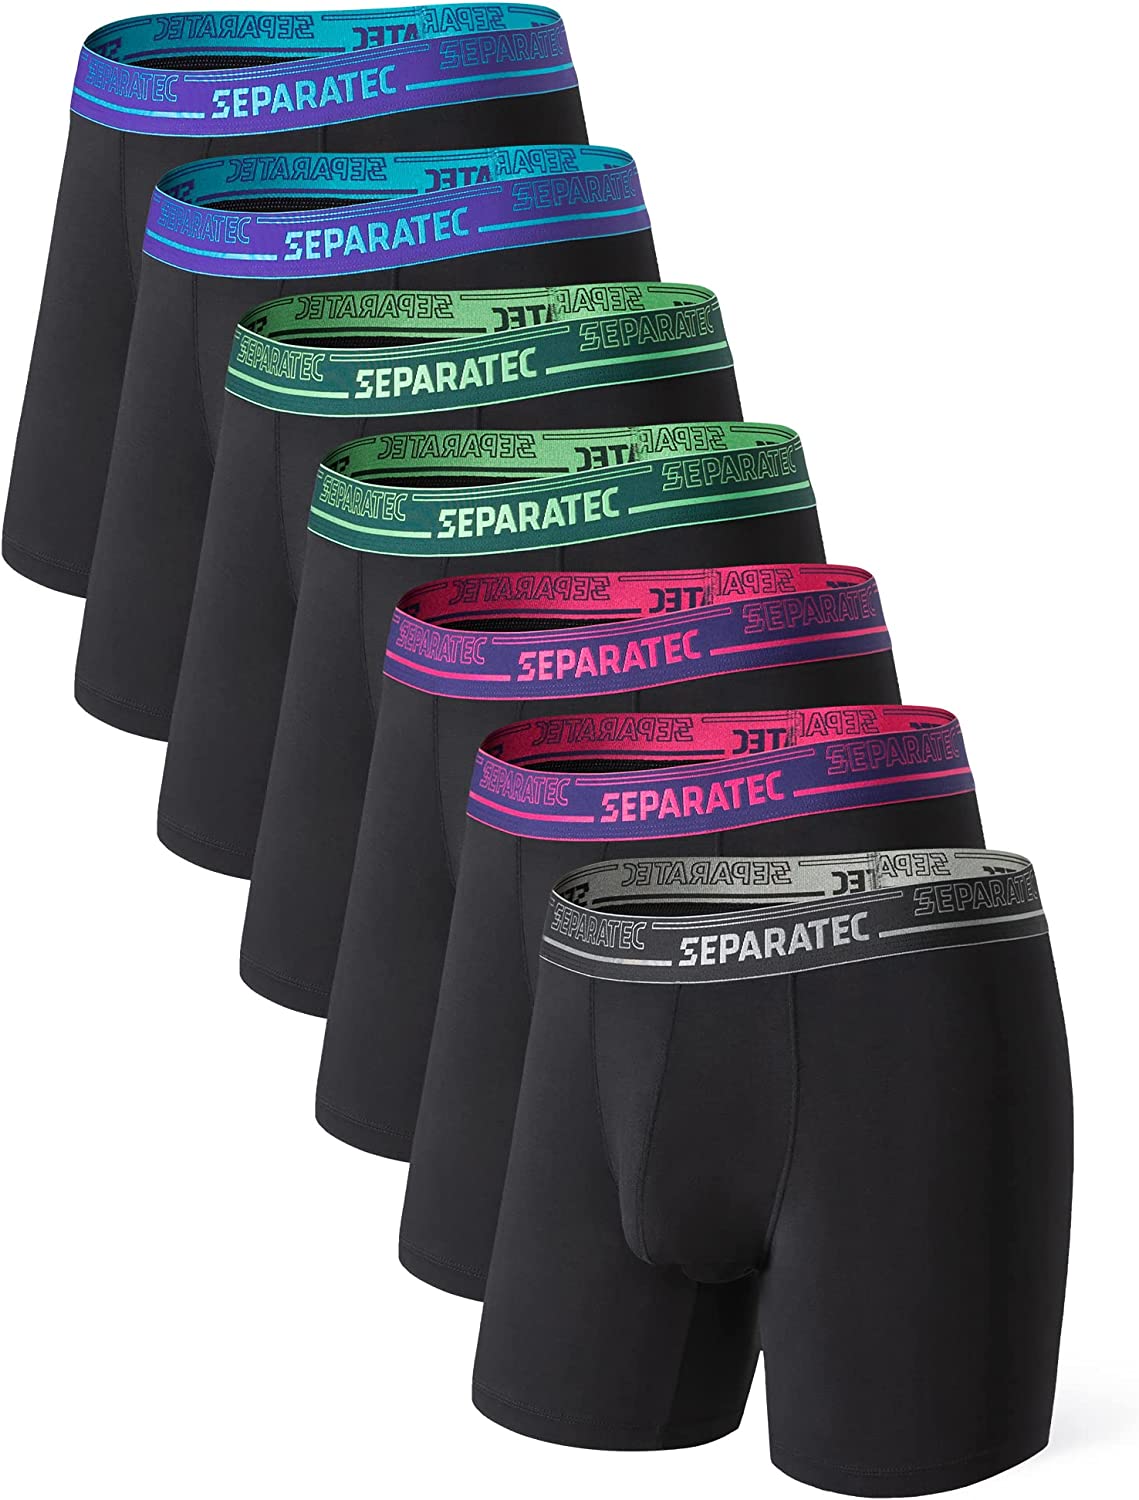 Separatec Men's 7 Pack Breathable Cotton Underwear Separated Pouch Colorful  Ever